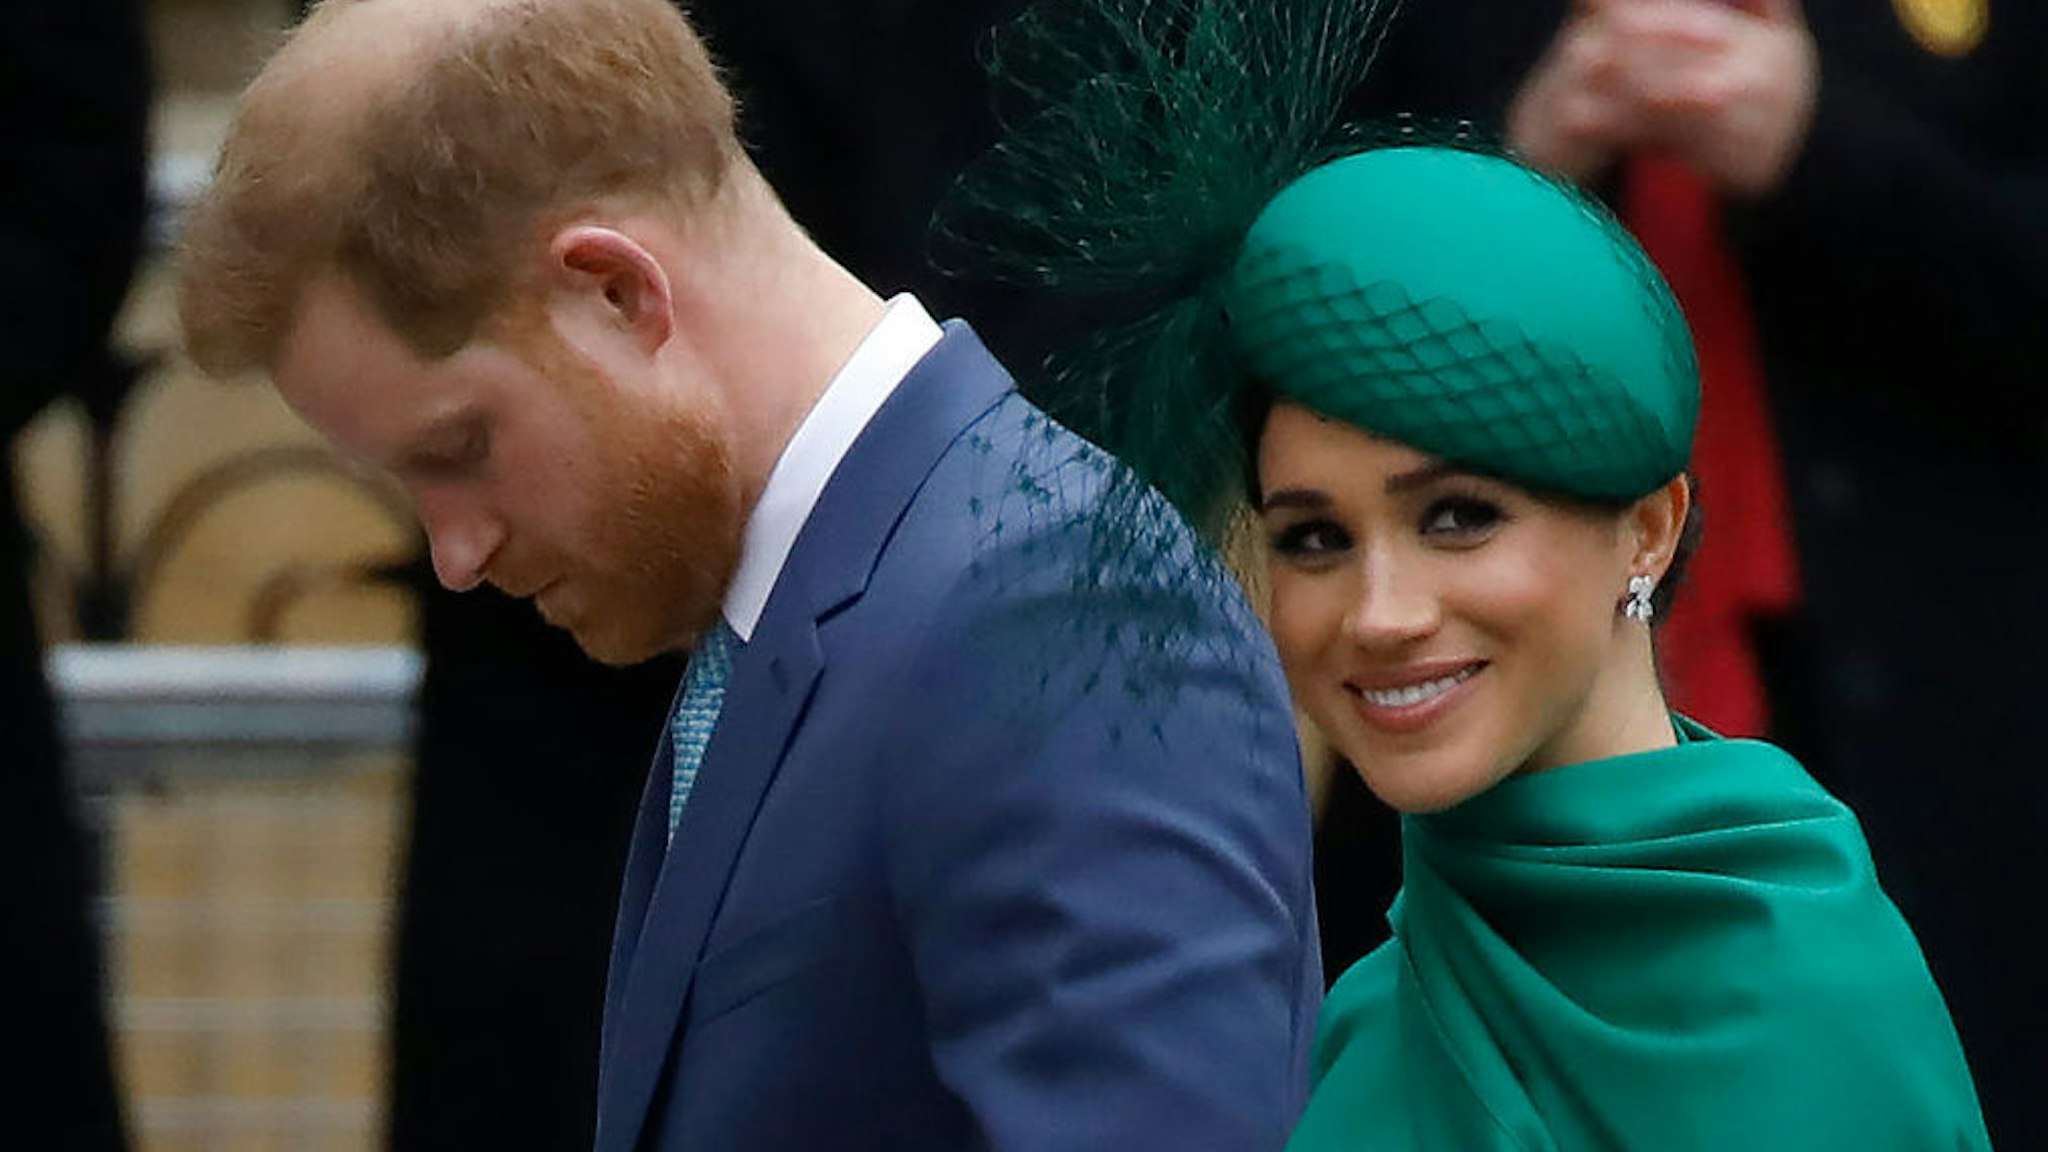 Britain's Prince Harry, Duke of Sussex, (L) and Meghan, Duchess of Sussex arrive to attend the annual Commonwealth Service at Westminster Abbey in London on March 09, 2020.